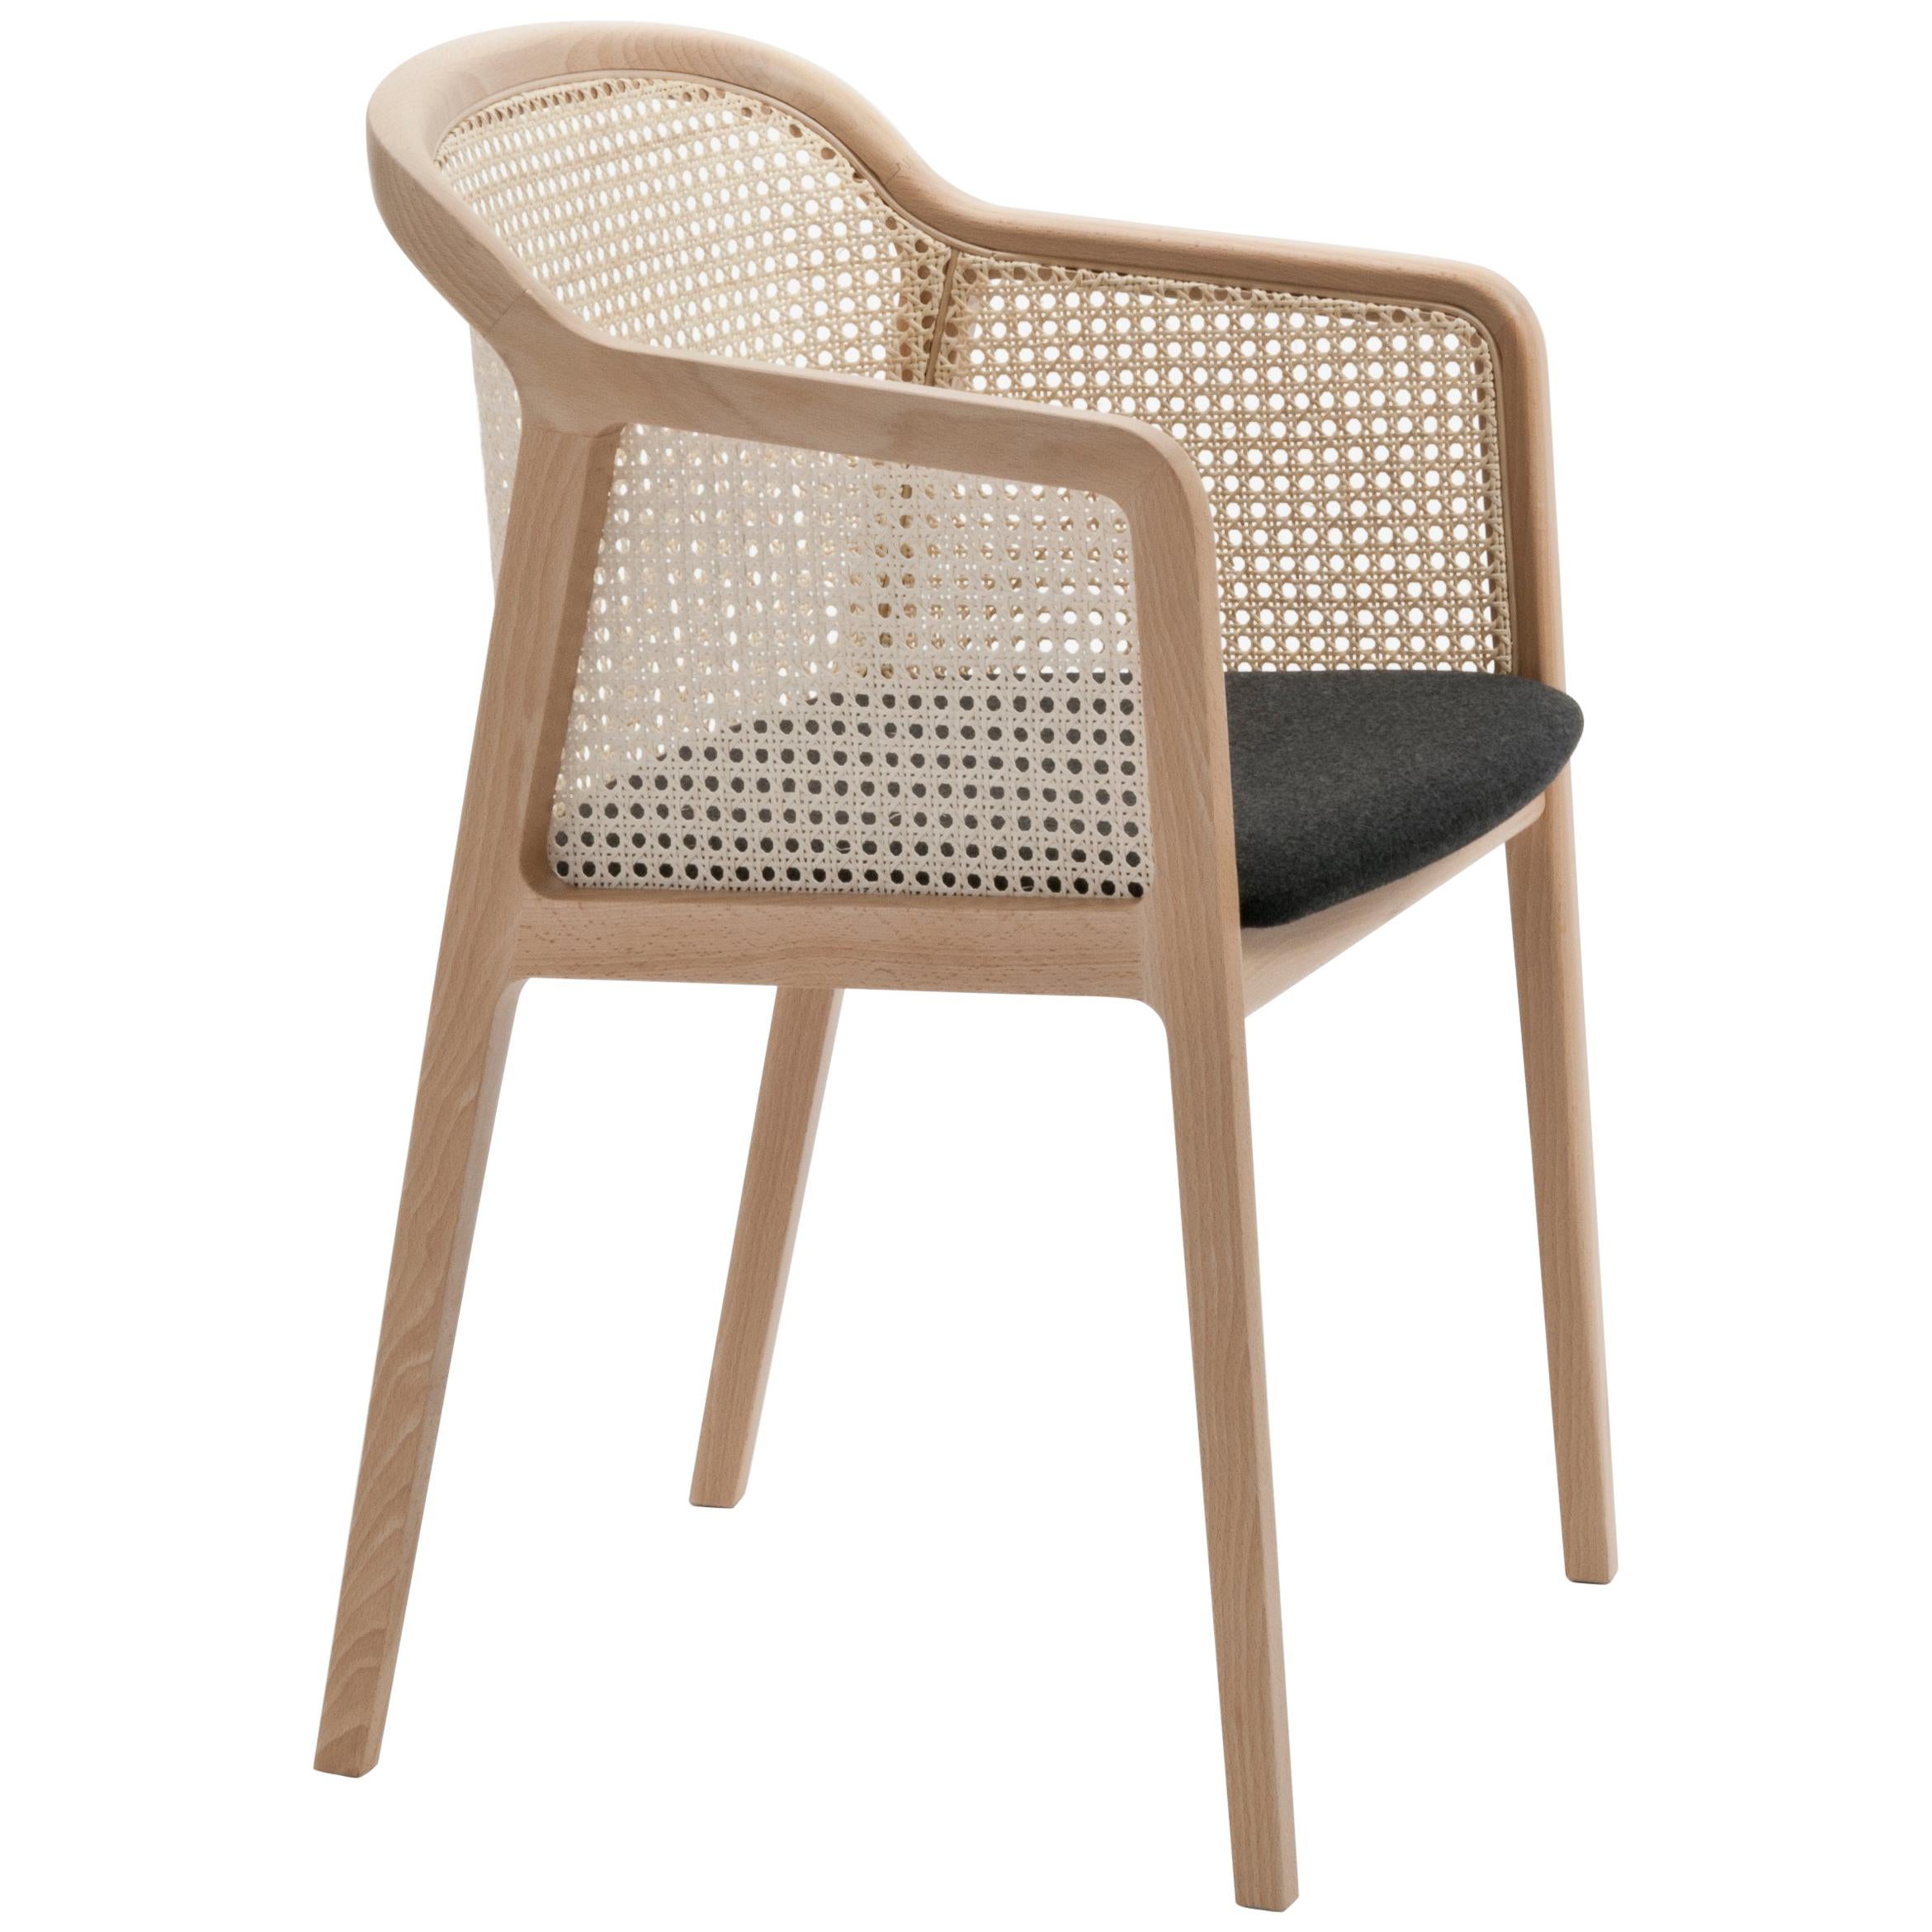 Vienna Armchair, Modern Design in Wood and Straw, Black Felt Upholstered Seat